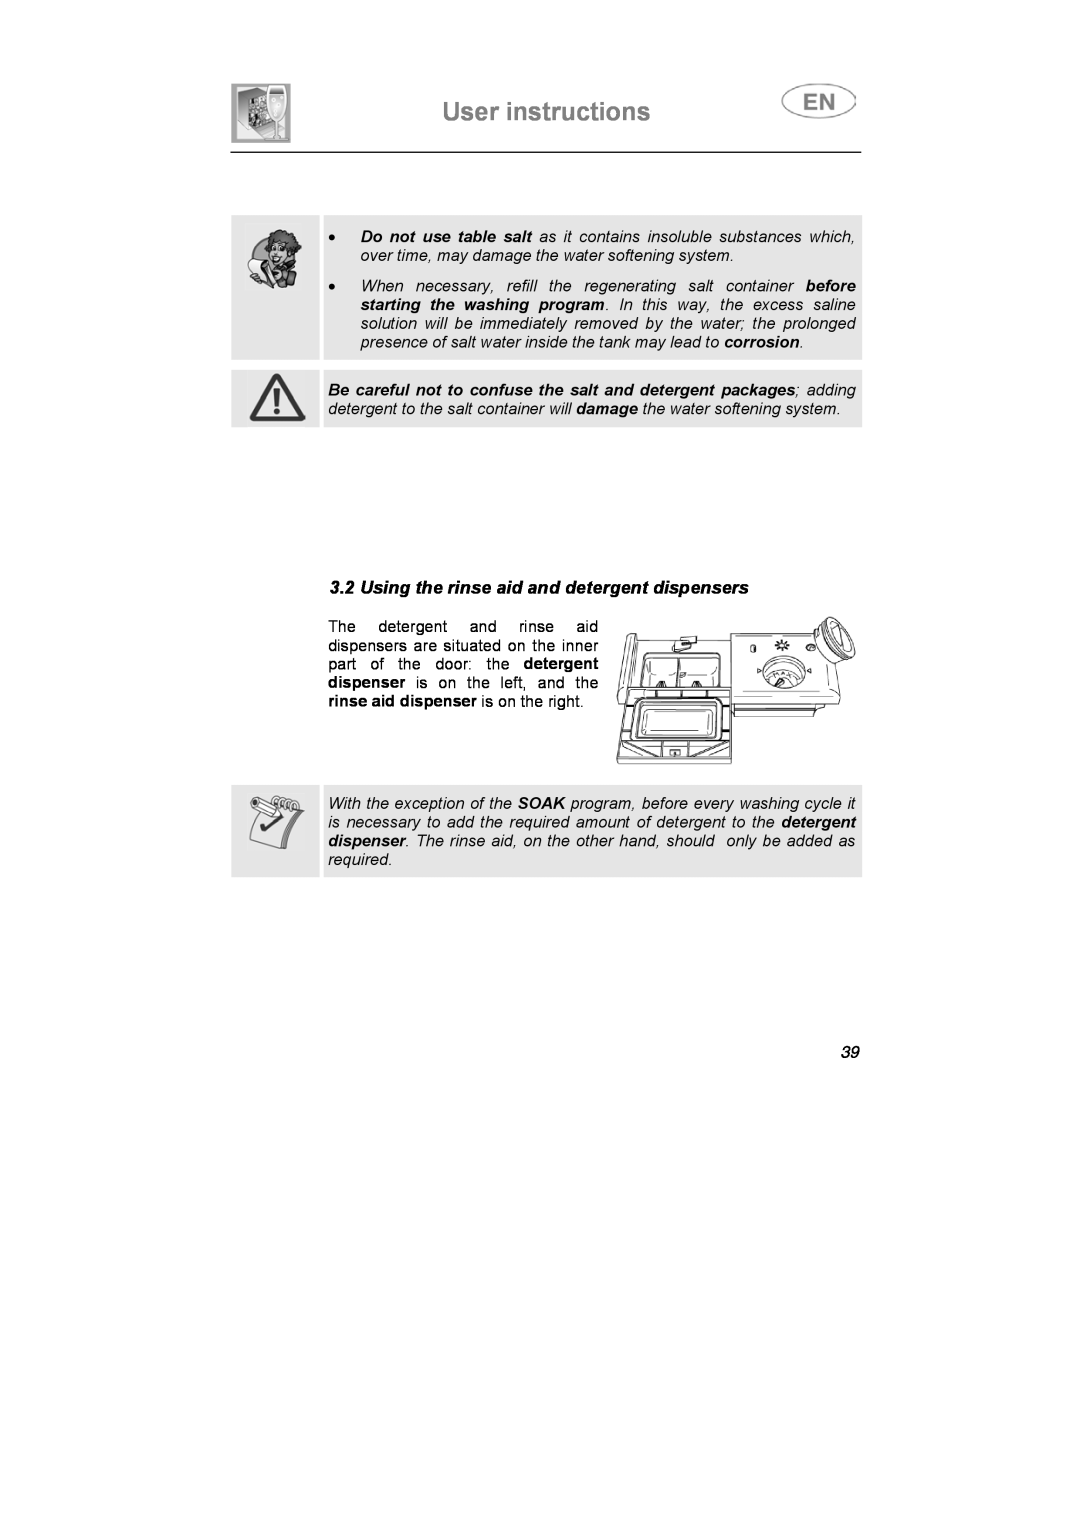 Smeg STA613 instruction manual User instructions, Using the rinse aid and detergent dispensers 